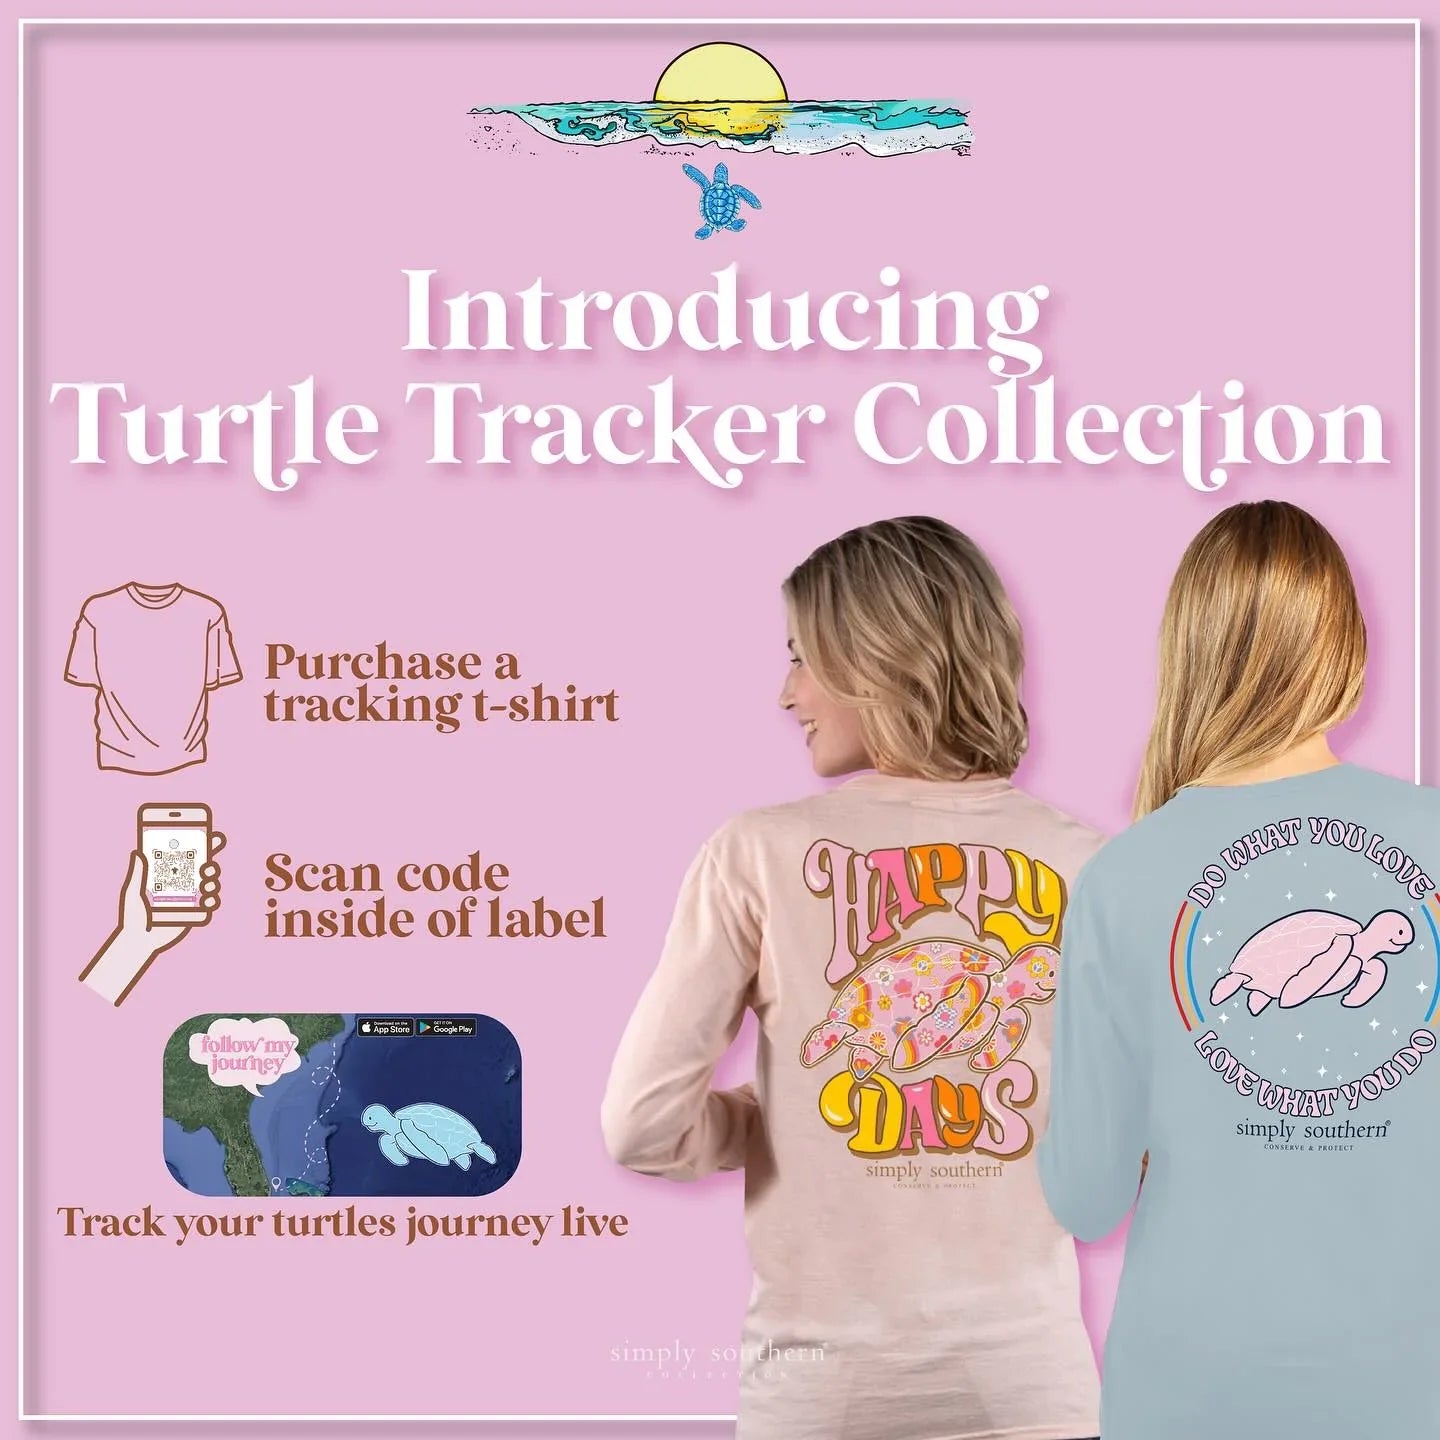 Women's Grow With The Flow (Turtle Tracking) Short Sleeve T-Shirt